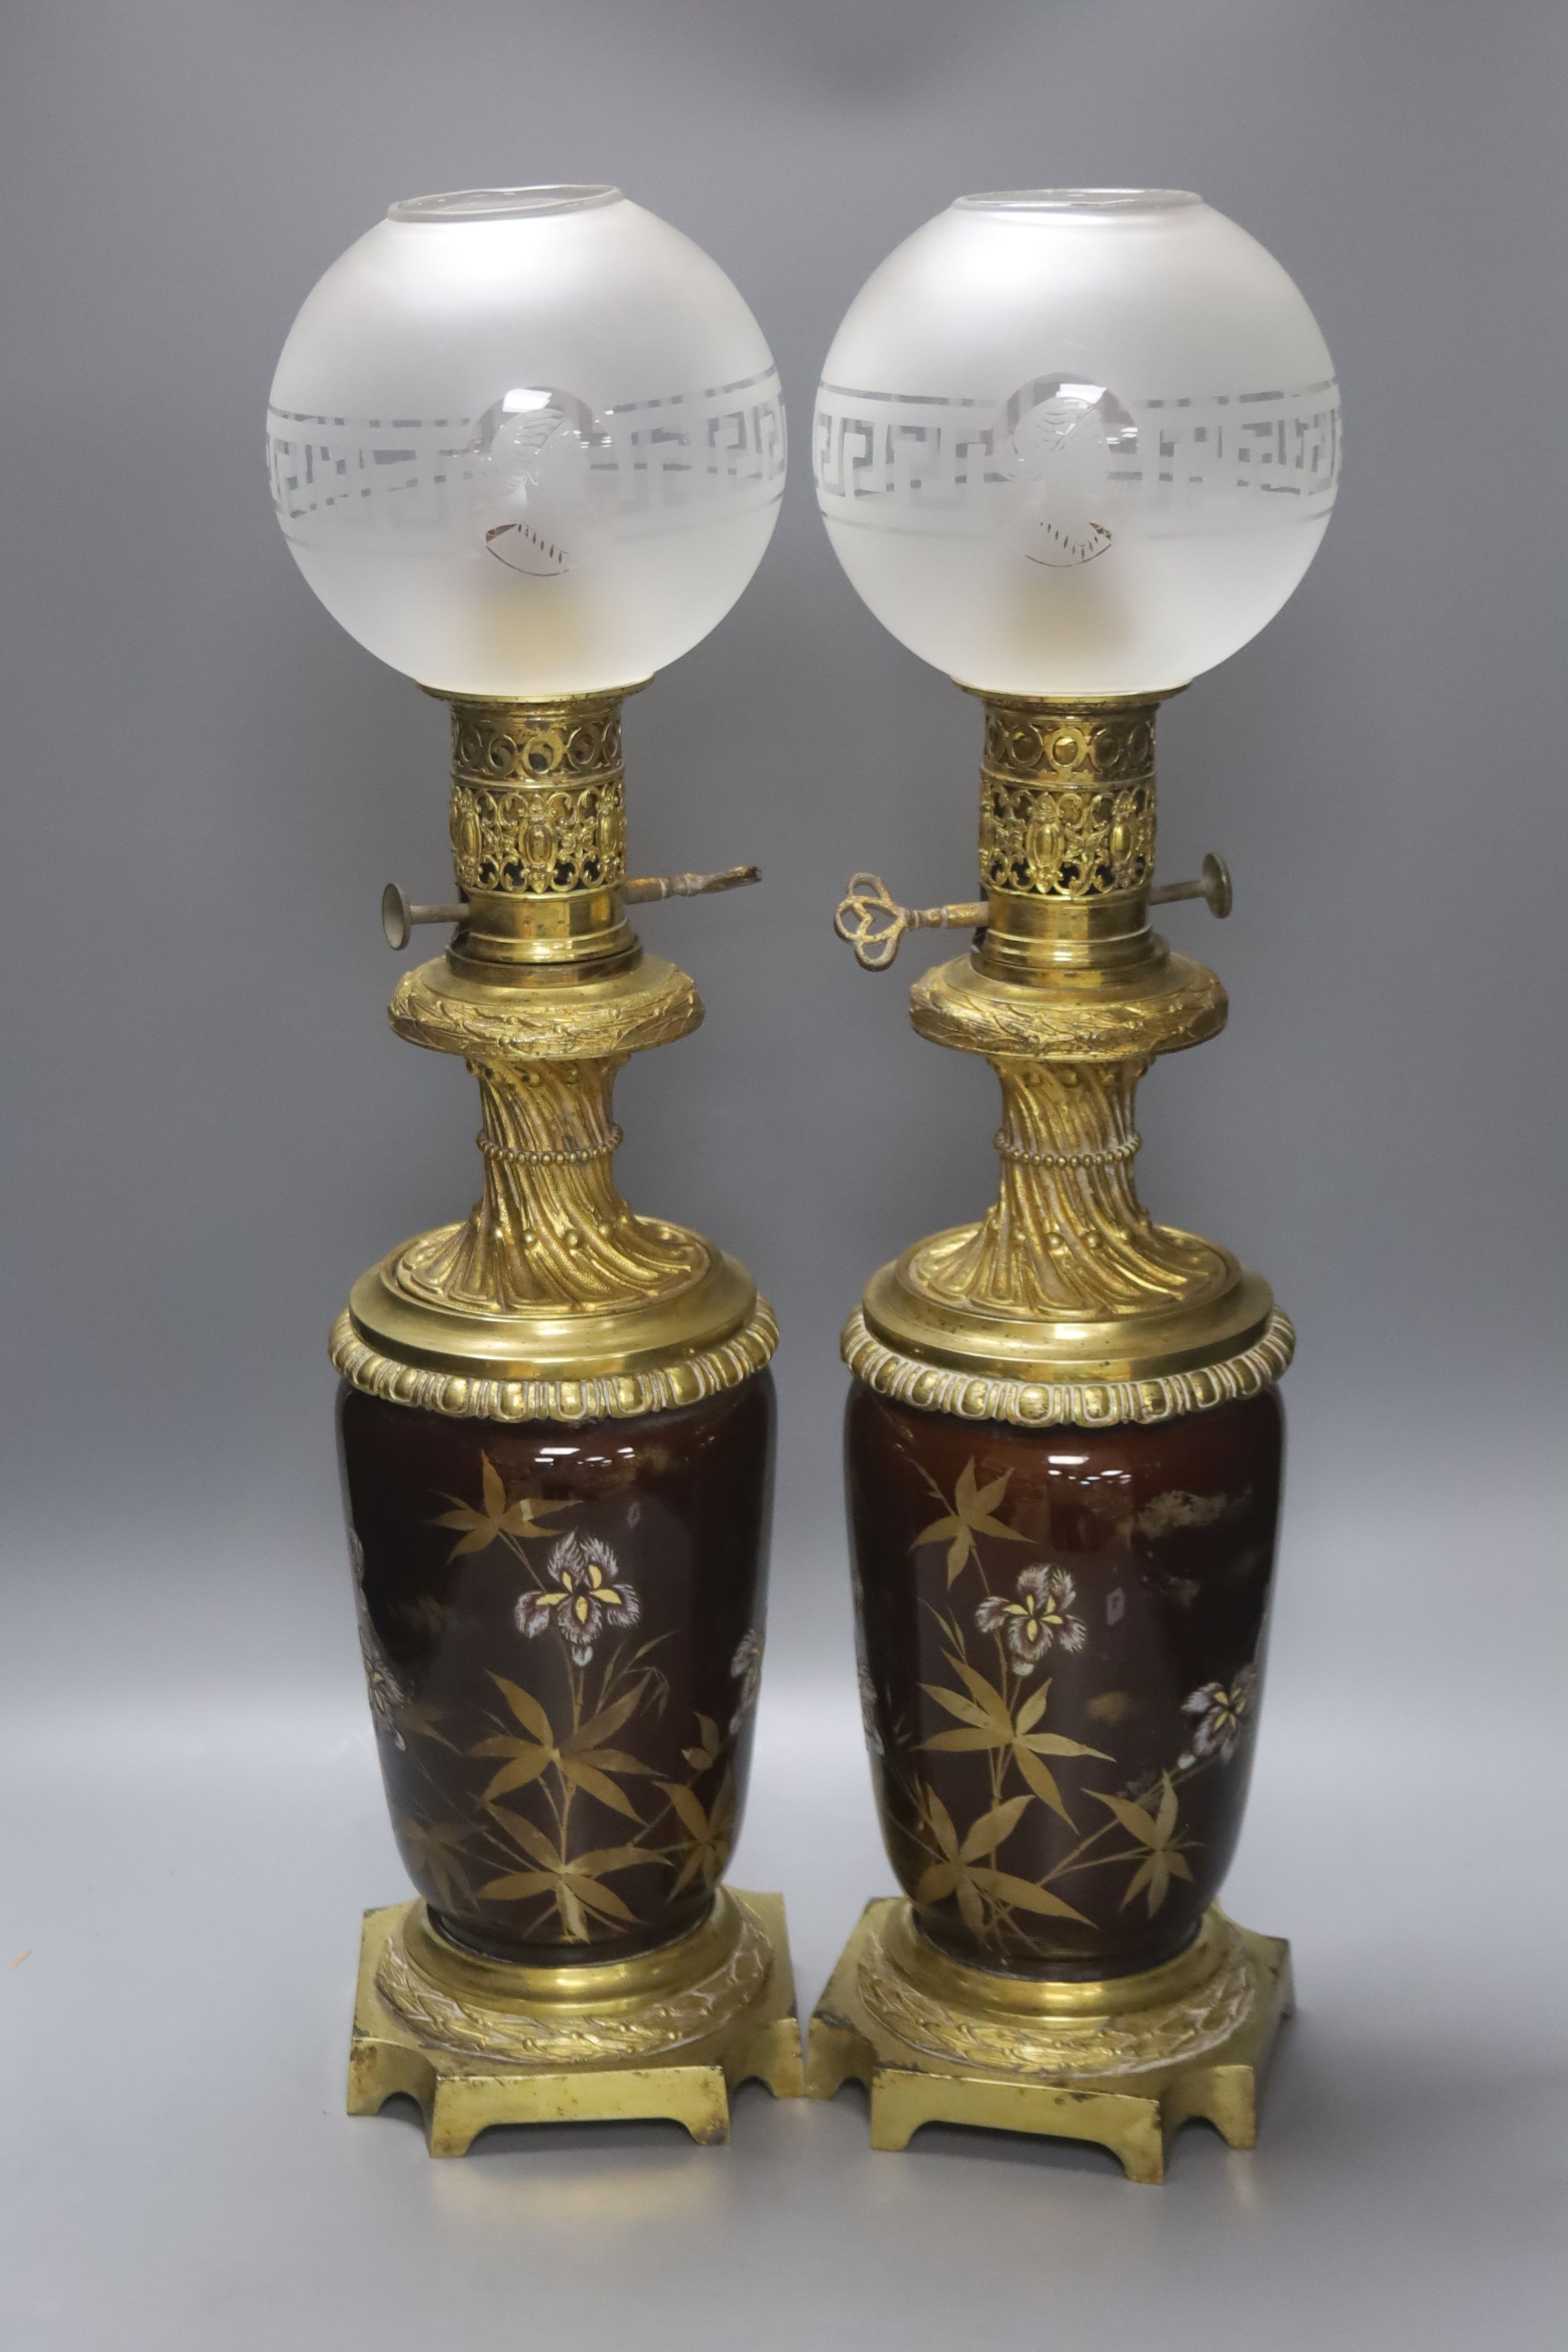 A pair of 19th century French ormolu and enamelled oil lamps, height 46cm